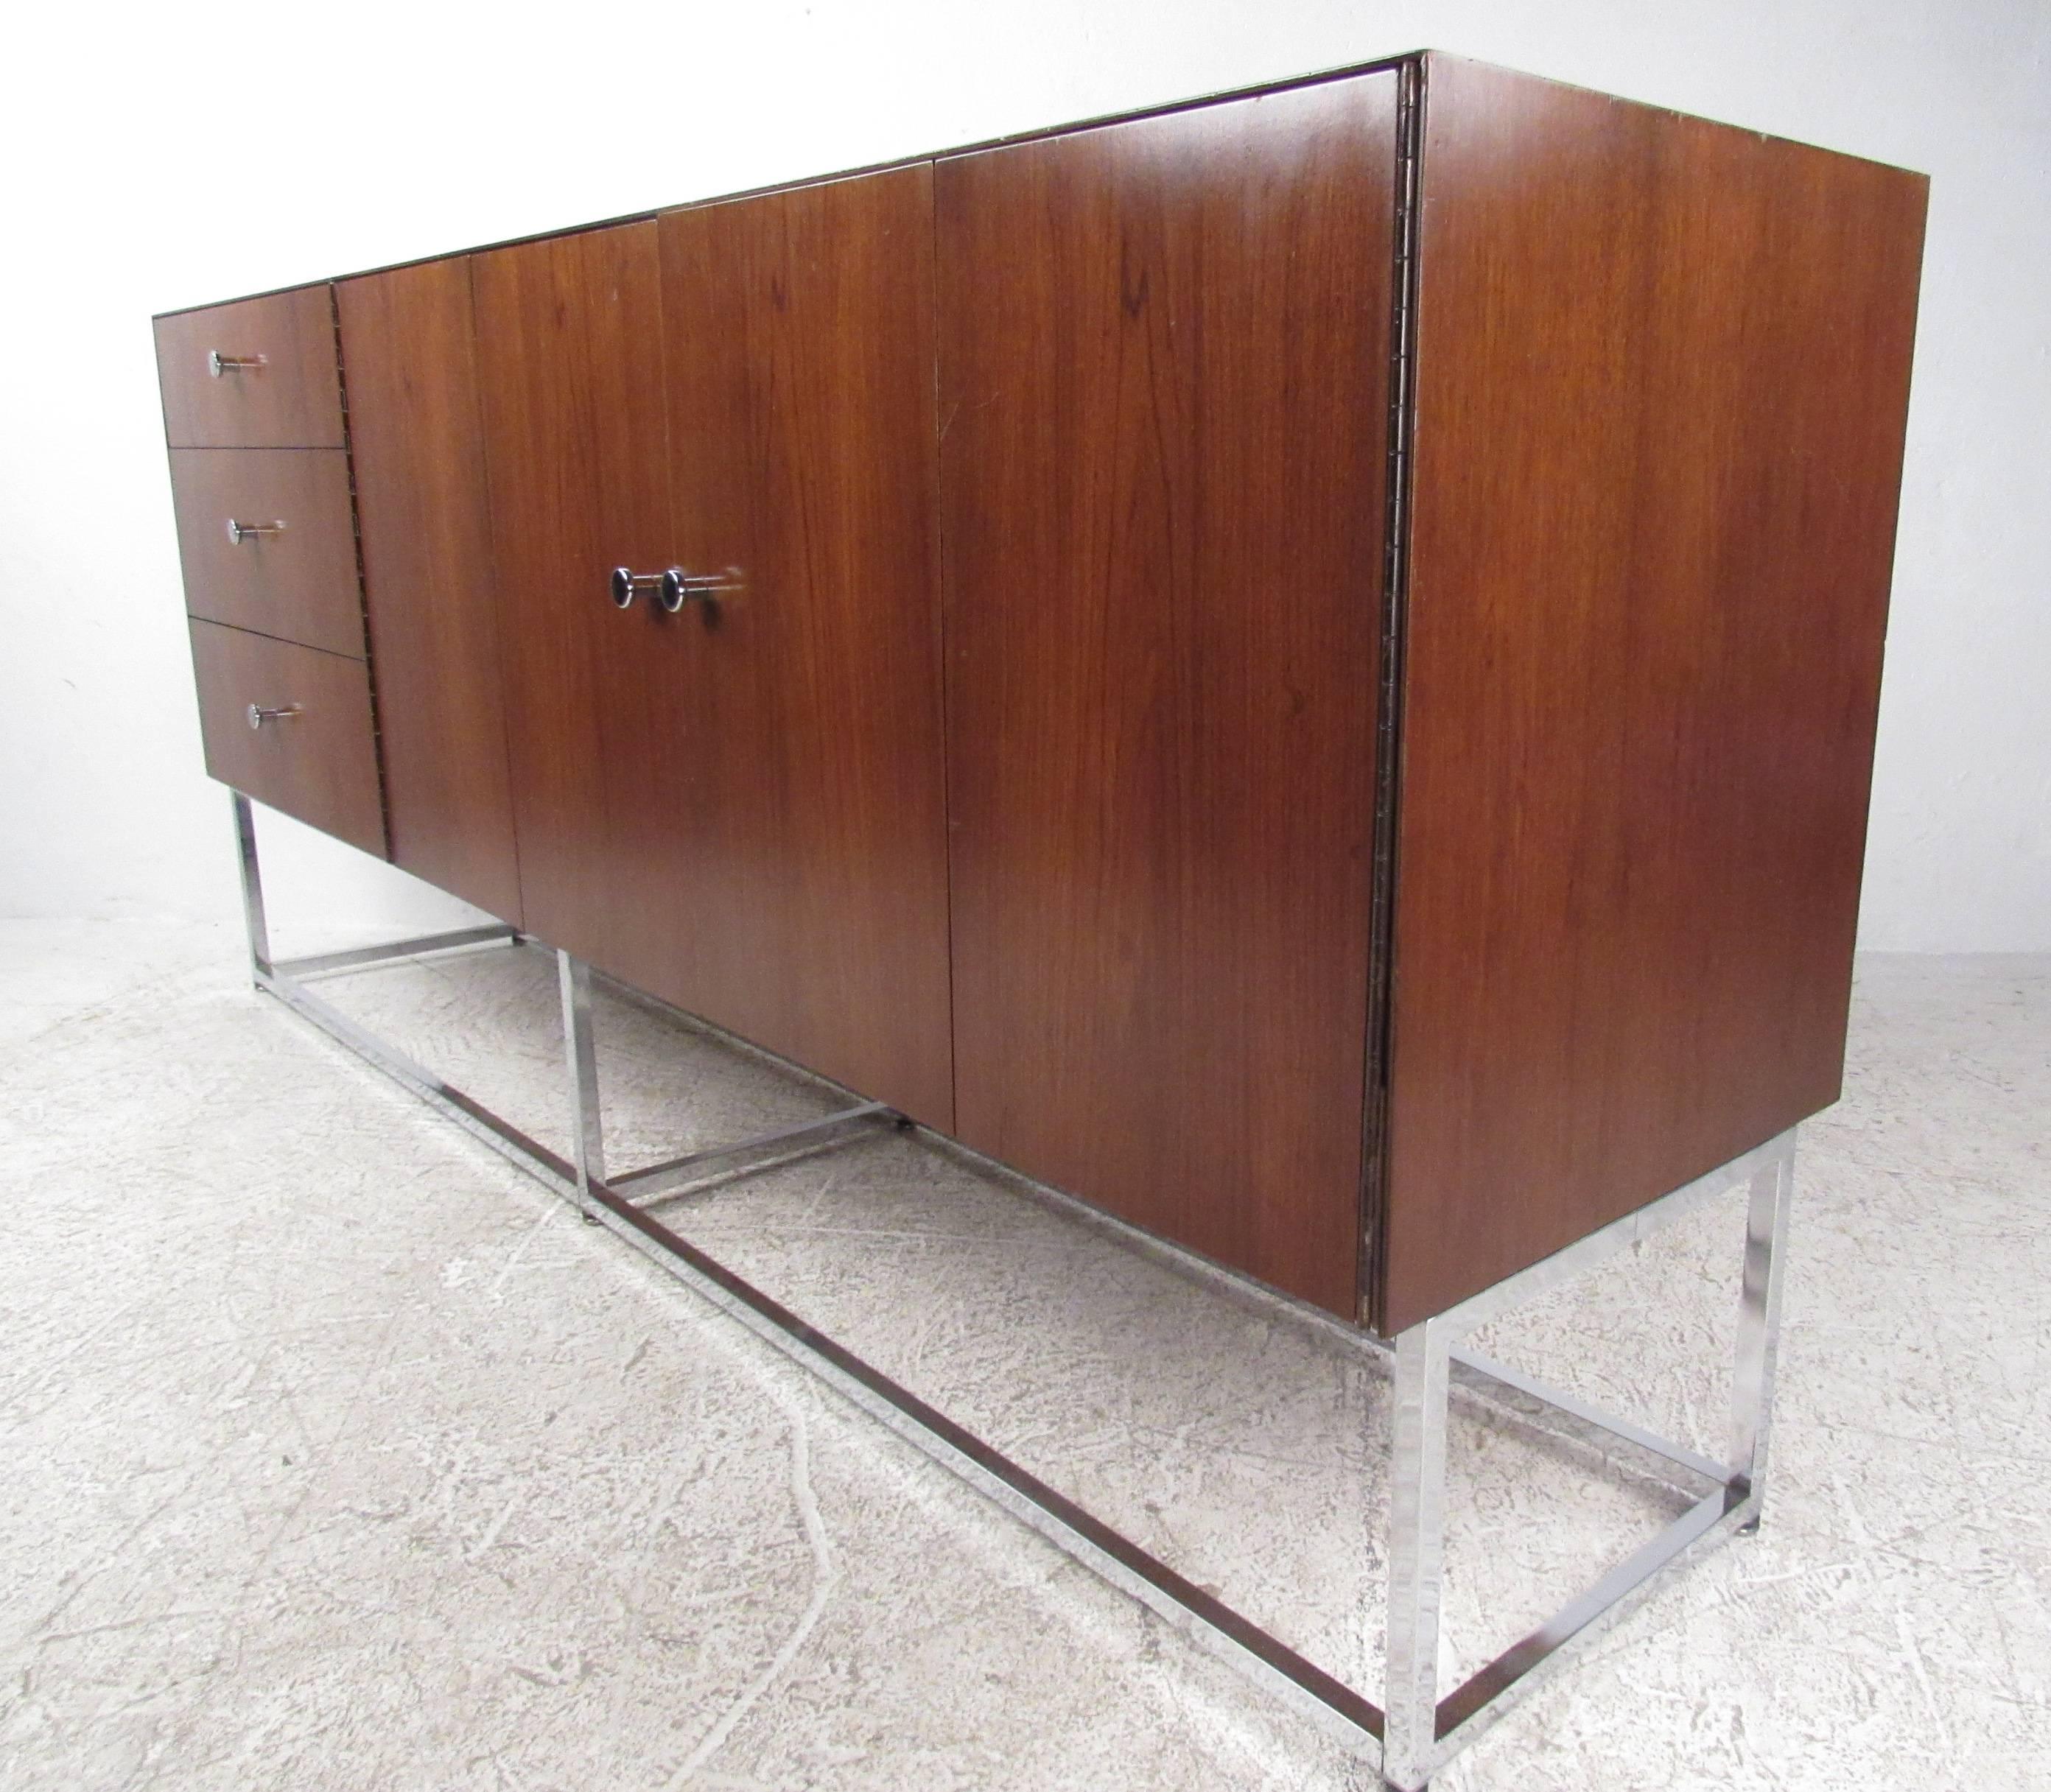 20th Century Mid-Century Modern Style Server/Credenza For Sale